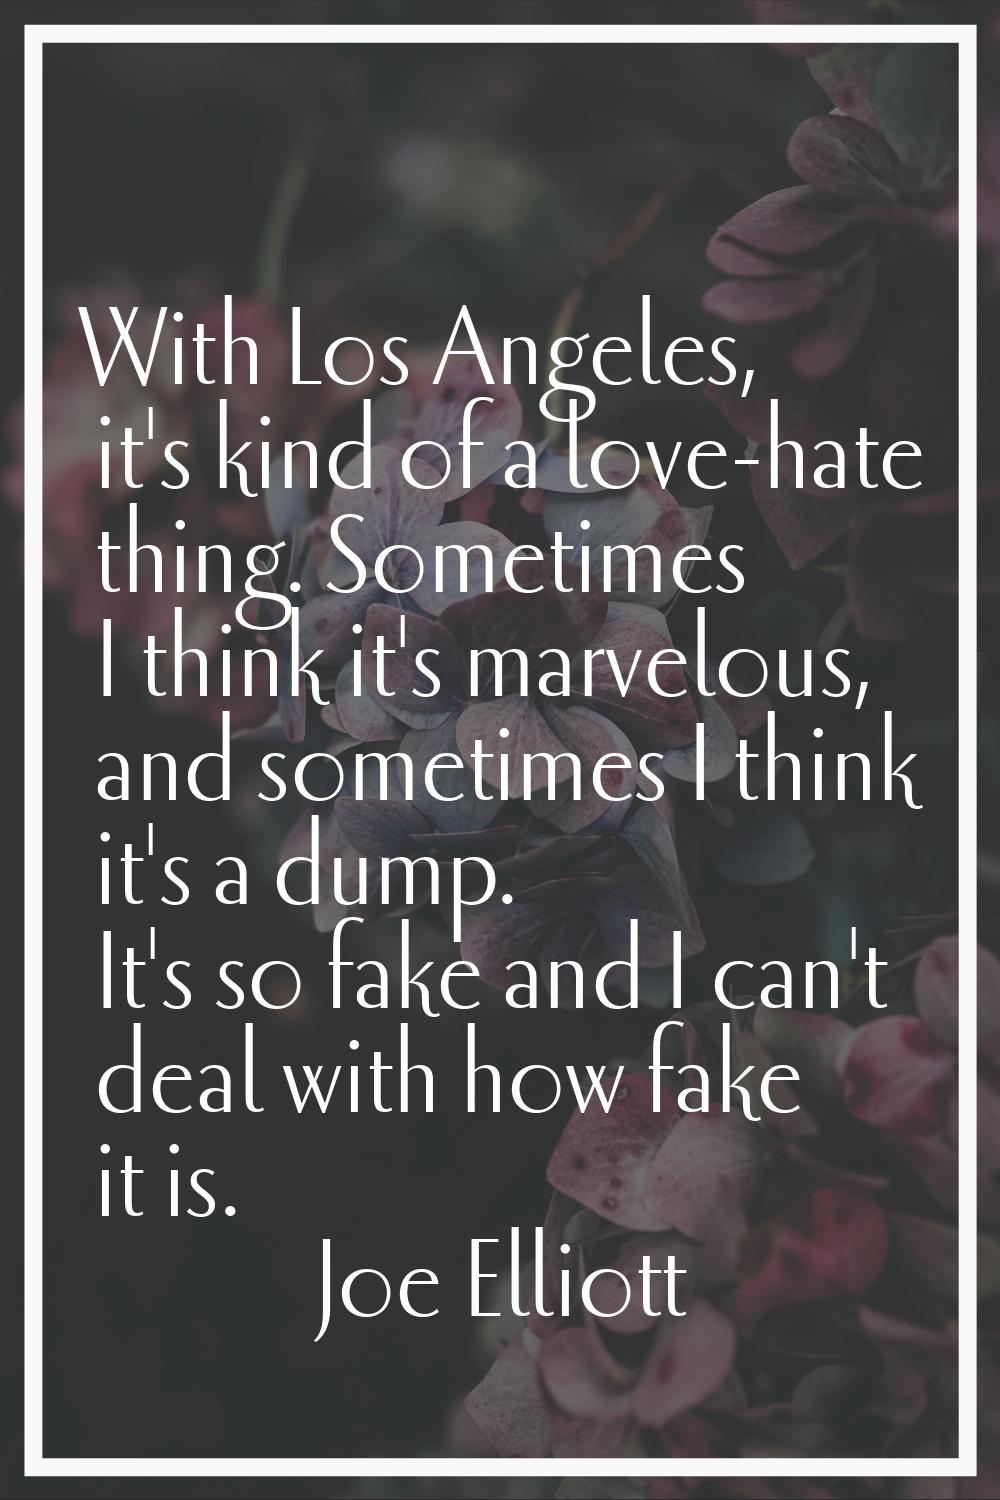 With Los Angeles, it's kind of a love-hate thing. Sometimes I think it's marvelous, and sometimes I